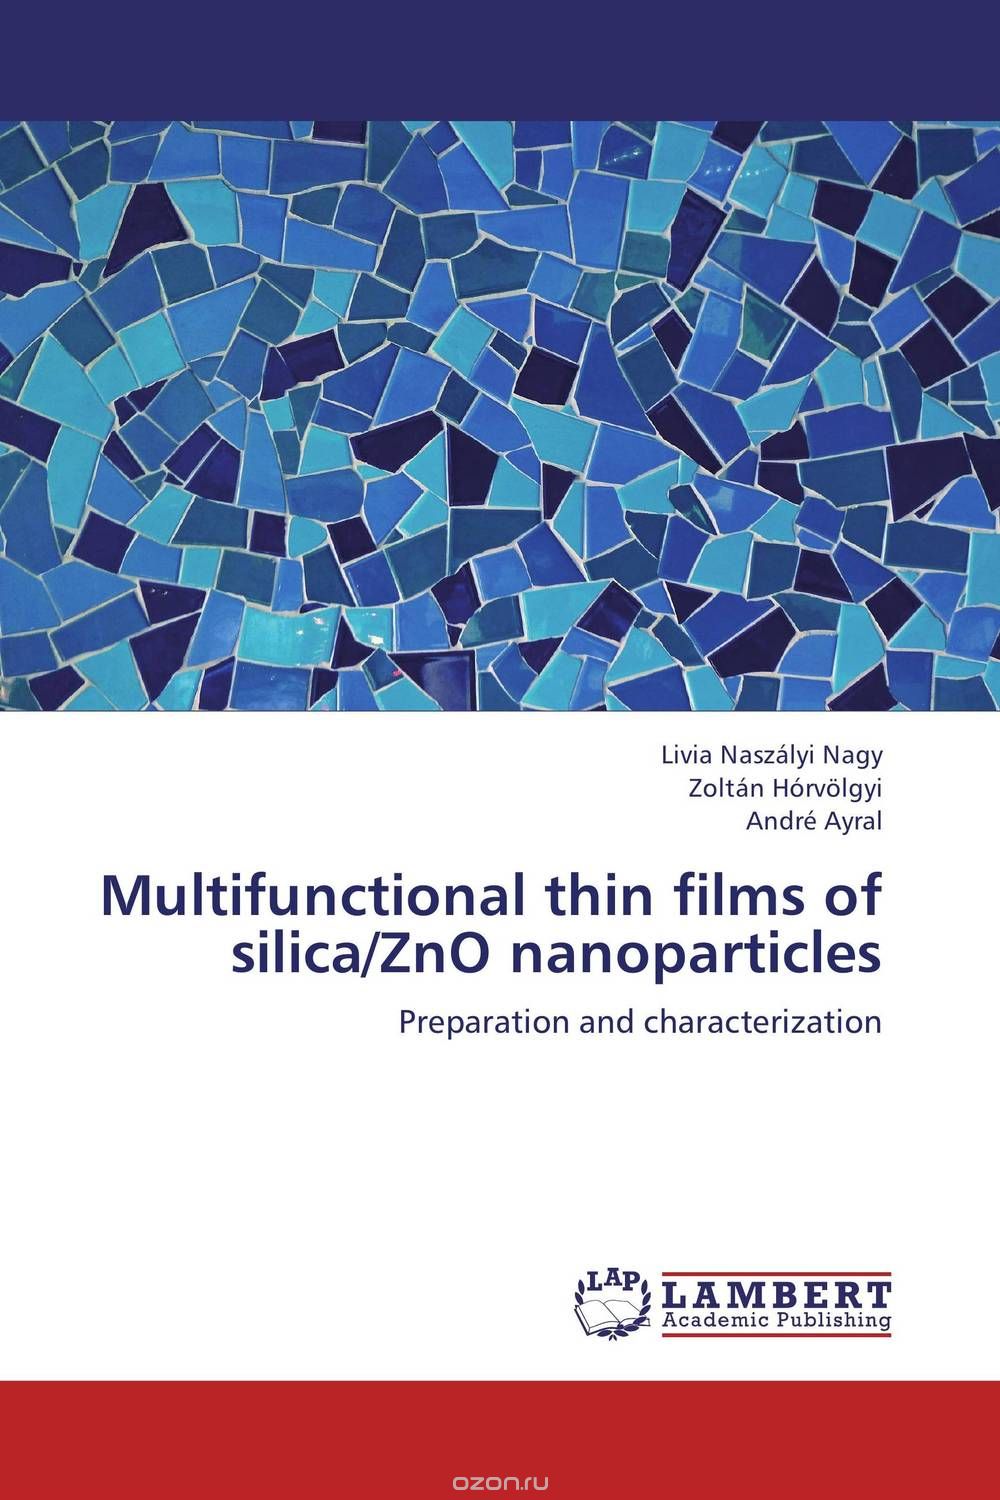 Multifunctional thin films of silica/ZnO nanoparticles